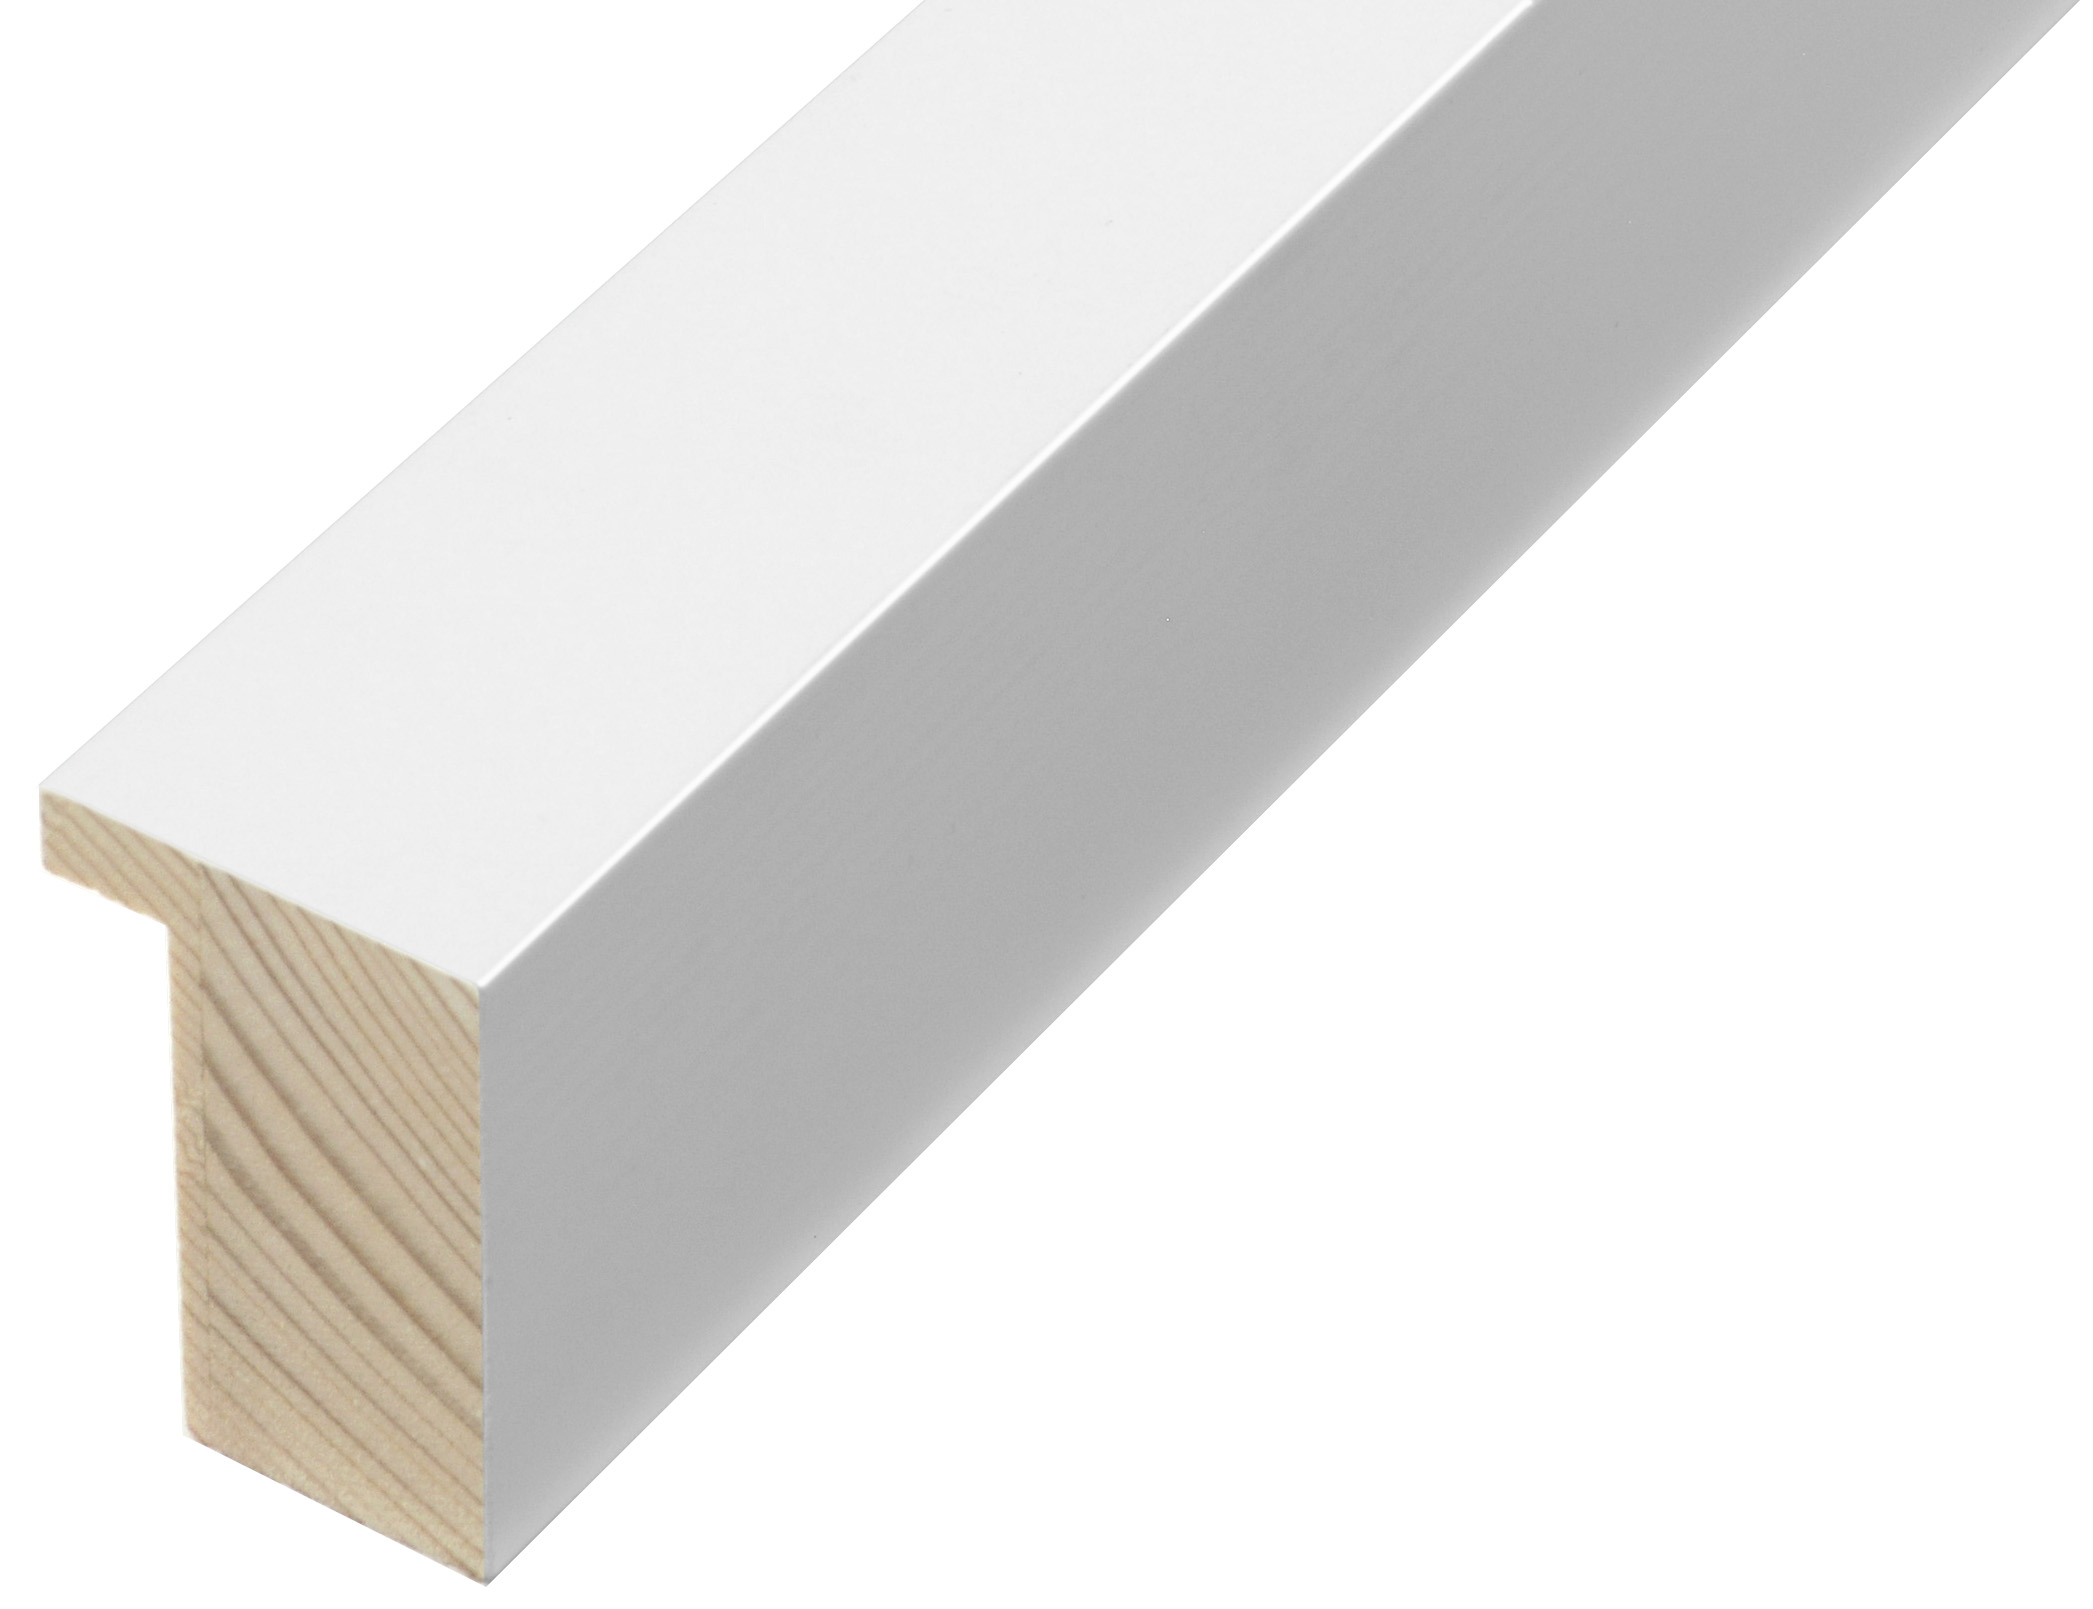 Moulding pine width 33mm height 50 - white